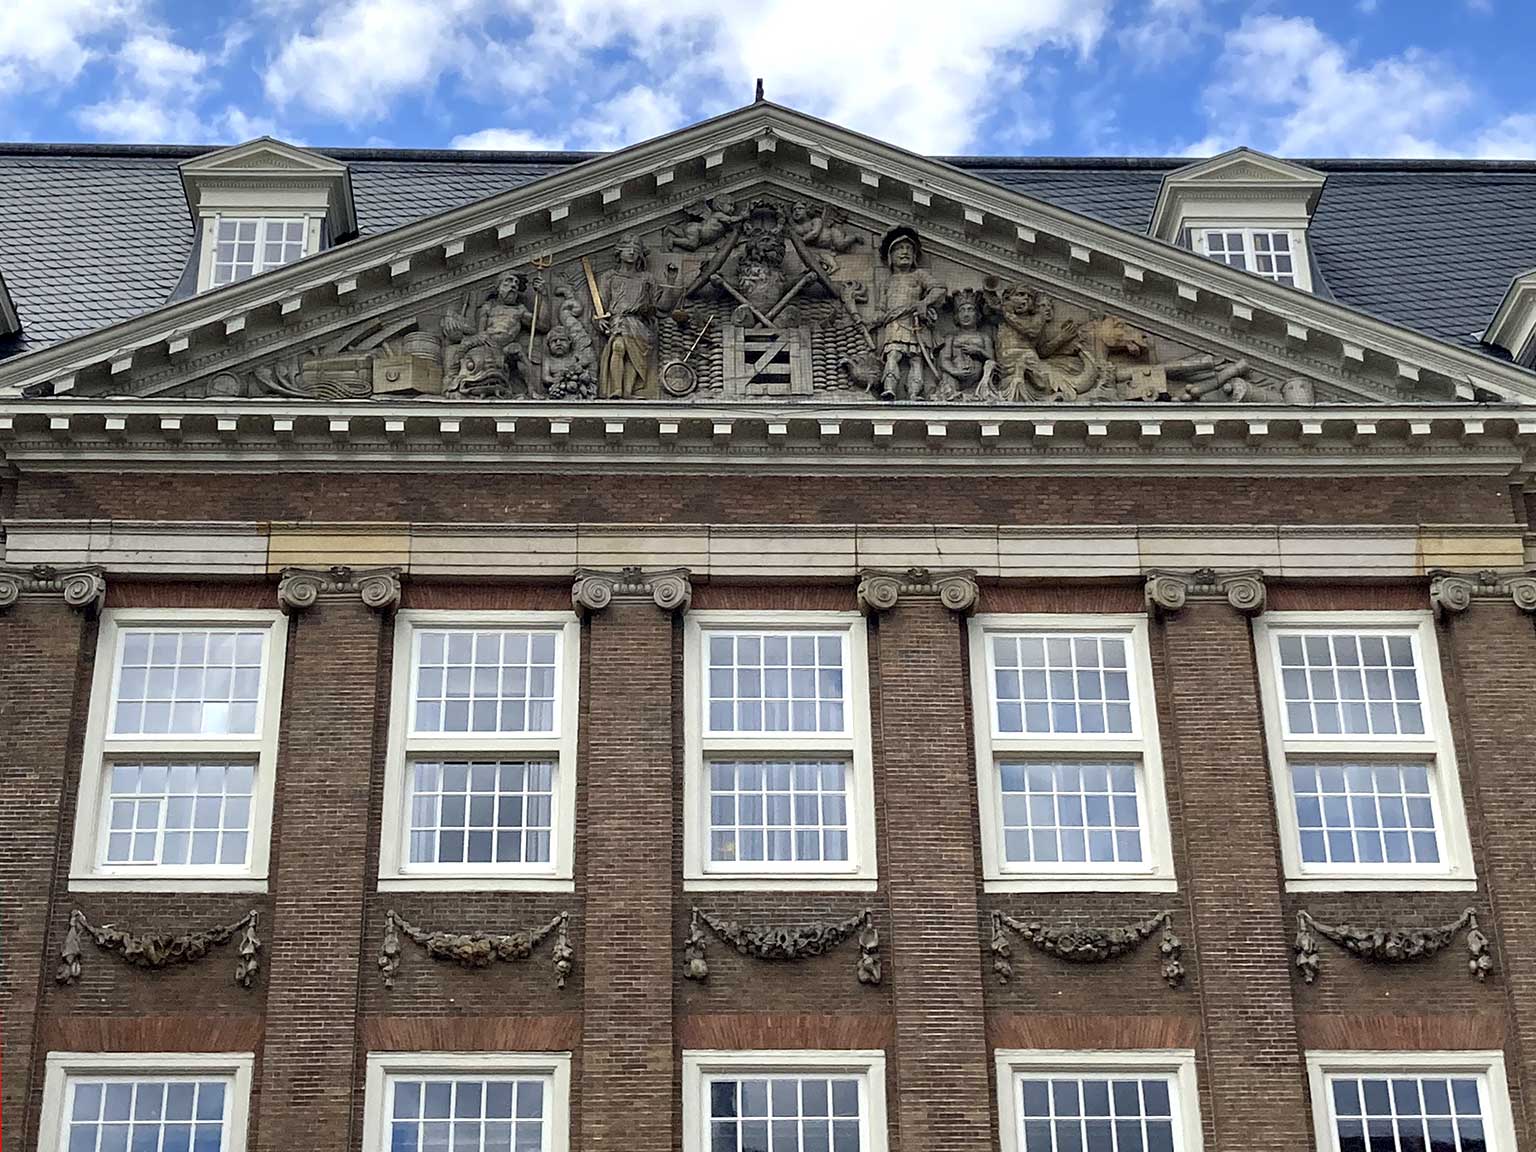 The courtyard of the Prinsenhof (The Grand), Amsterdam